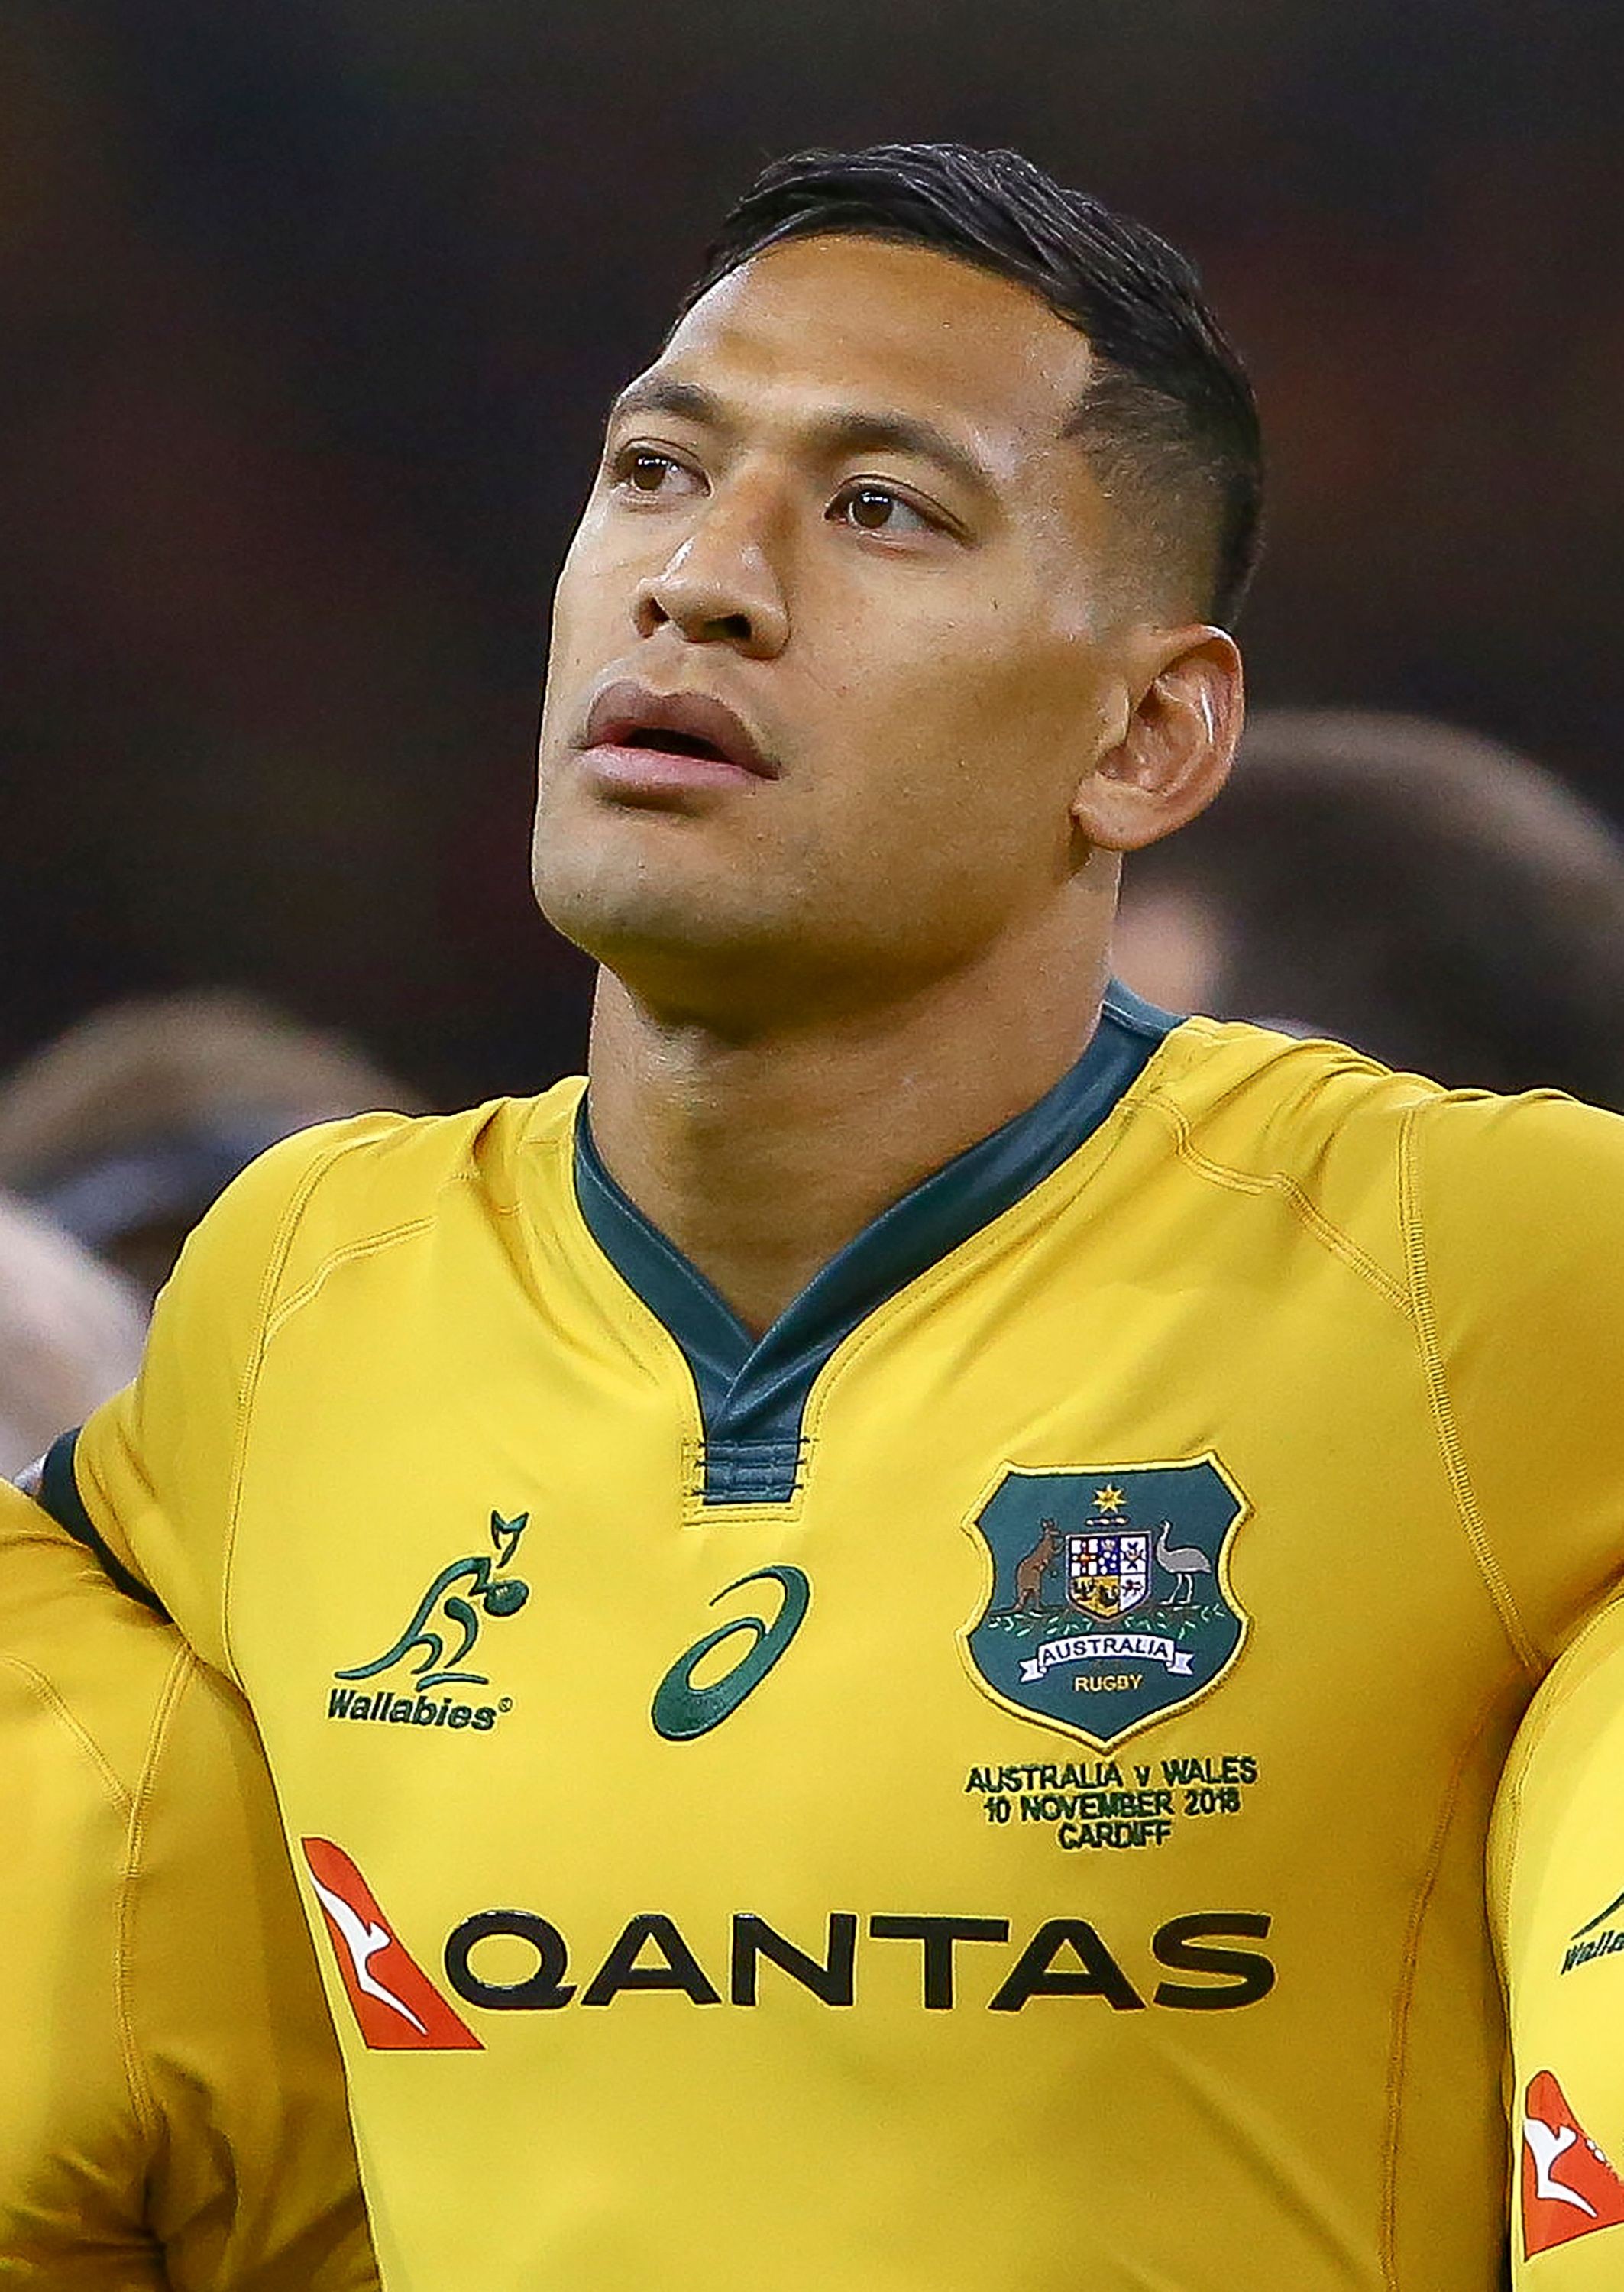 Isreal Folau was one of Australia’s best players before his contract was ripped up. He is now suing Rugby Australia for unlawful termination. Photo: Geoff Caddick